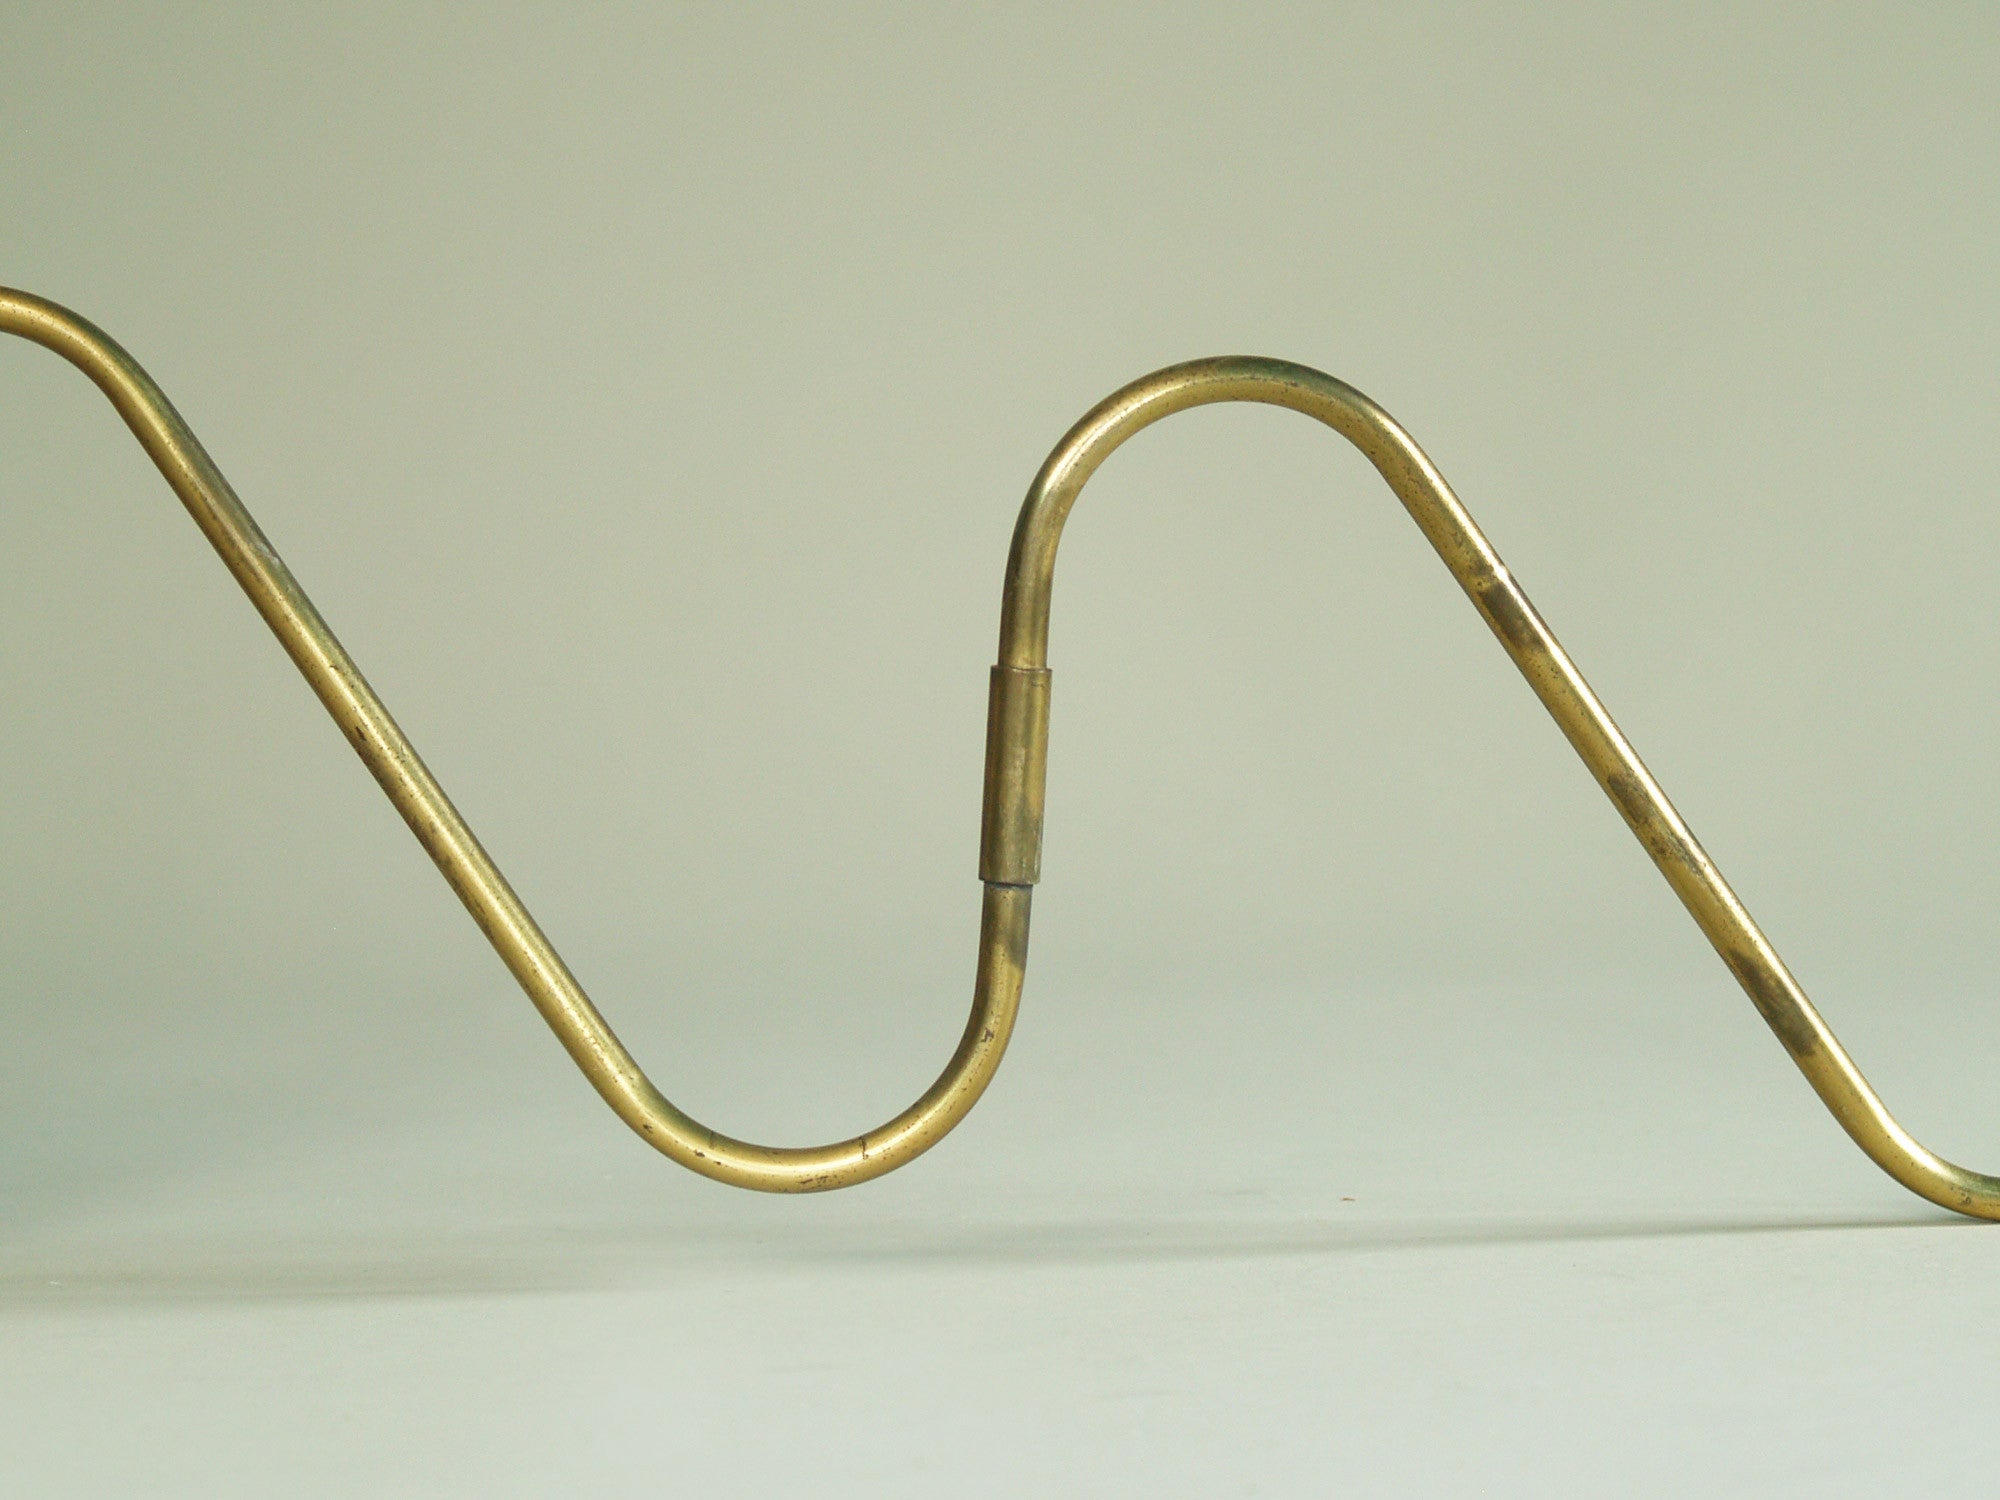 Paire d’appliques / potences de Bent Karlby pour Lyfa, Danemark (vers 1950)..Pair of swing arm wall light by Bent Karlby for Lyfa, Denmark (circa 1950)